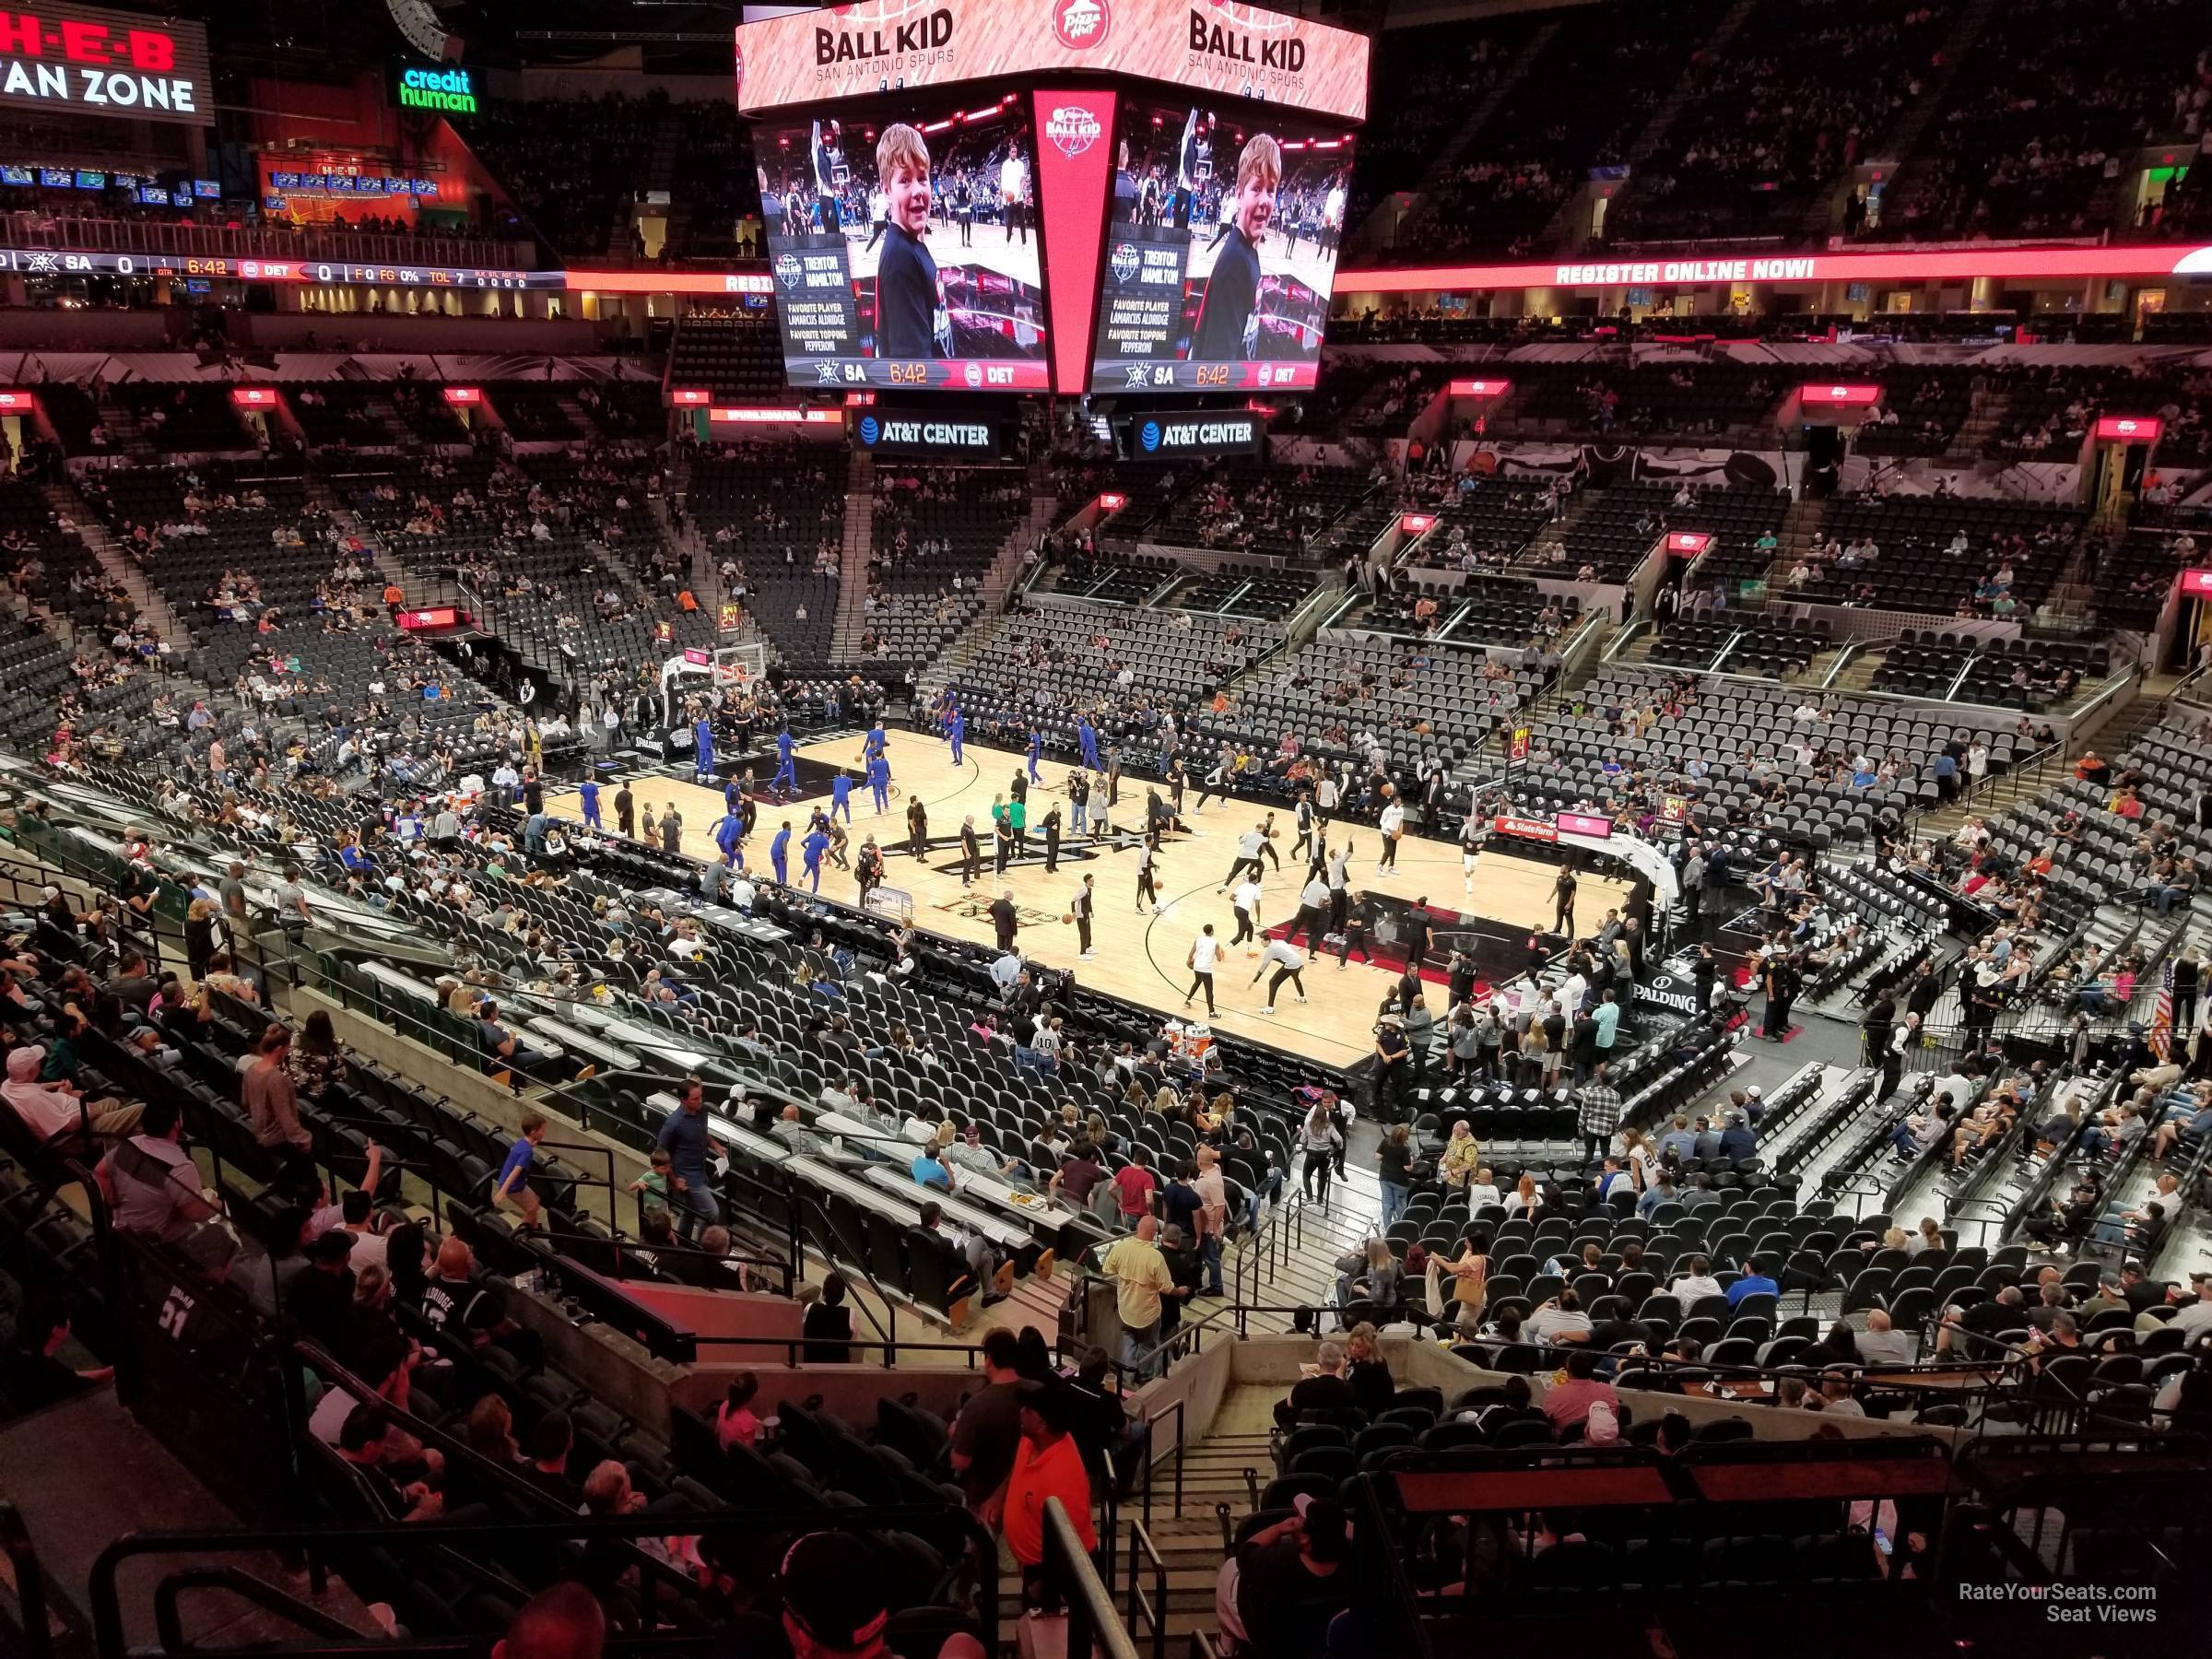 Section 104 at AT T Center San Antonio Spurs RateYourSeats com